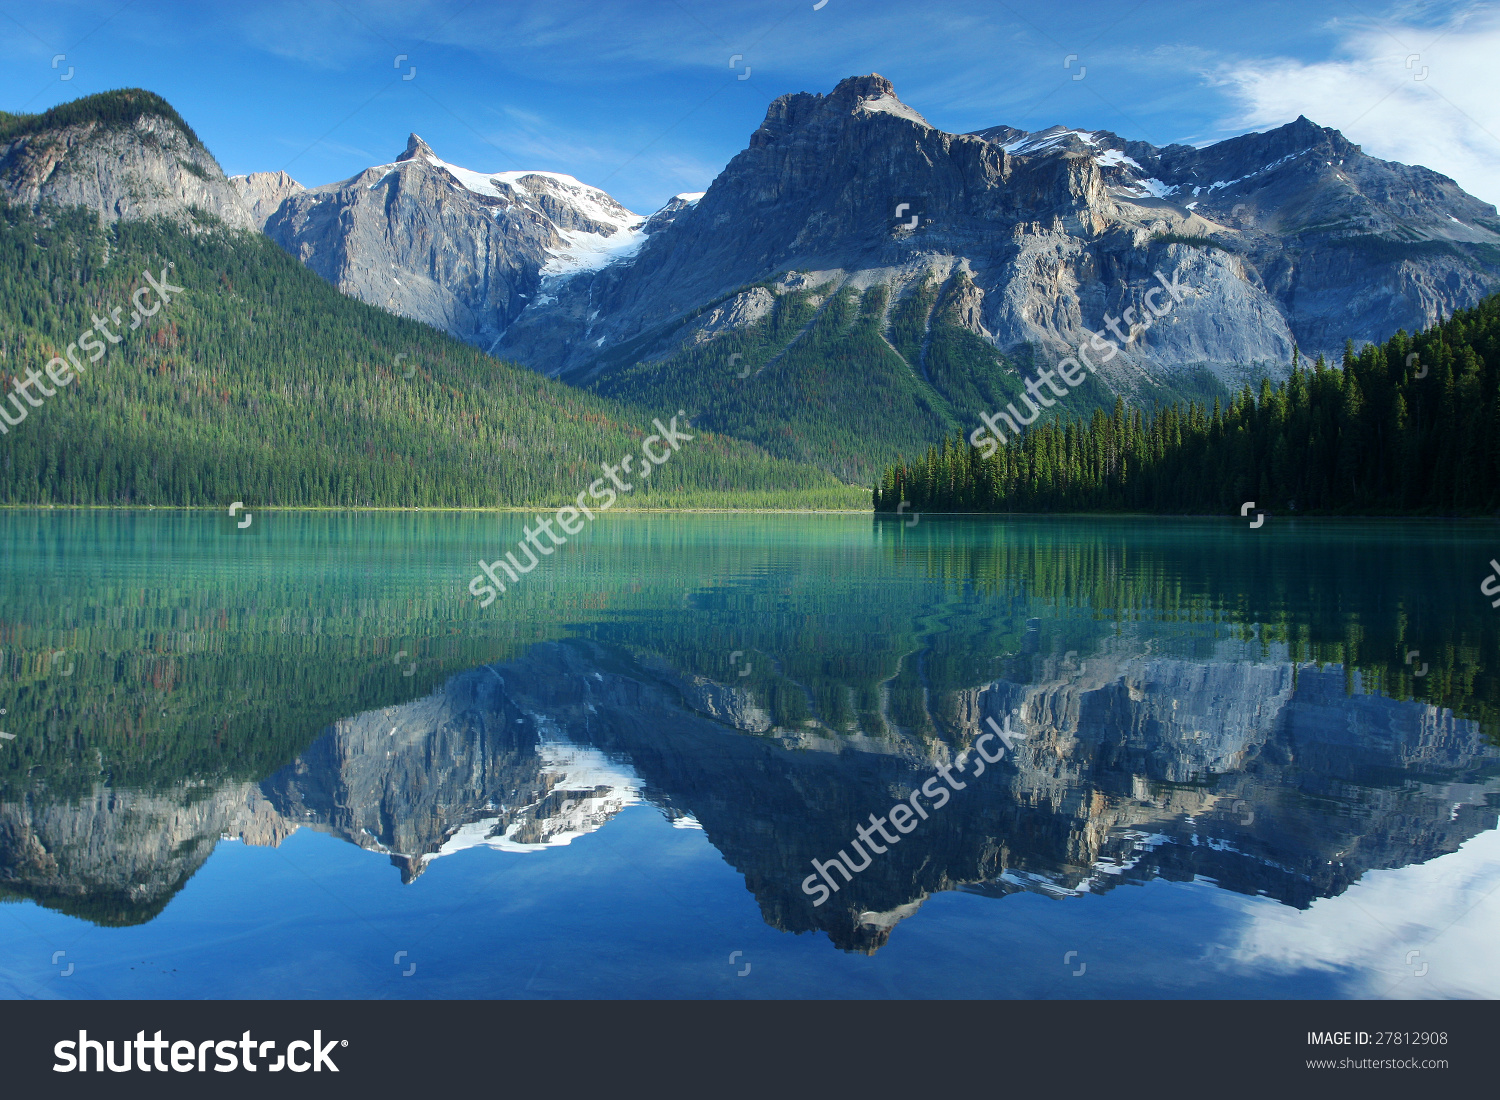 Yoho National Park clipart #1, Download drawings